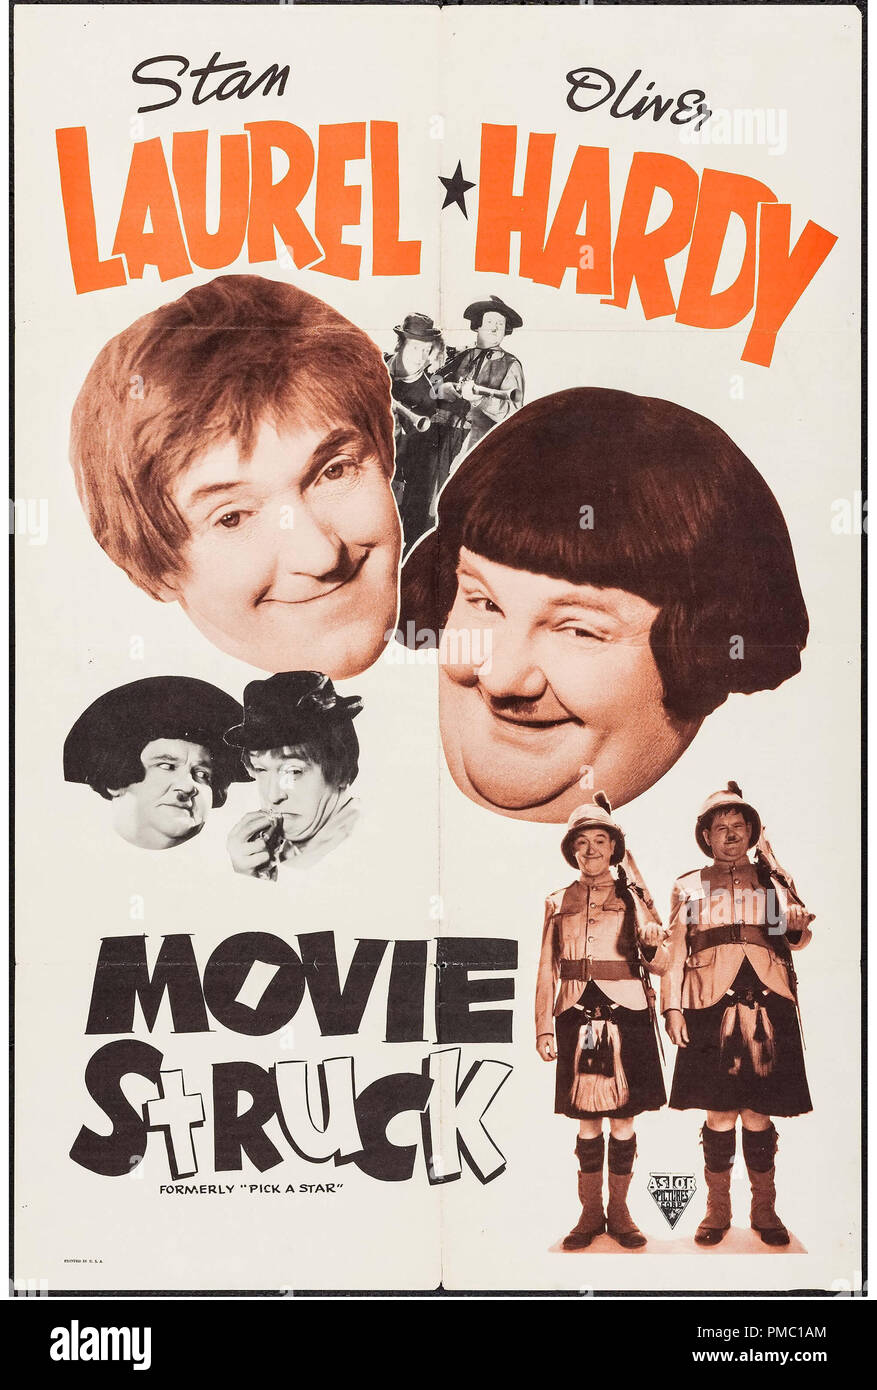 Stan Laurel, Oliver Hardy, Movie Struck (aka Pick A Star) Poster File  Reference # 33595 310THA Stock Photo - Alamy